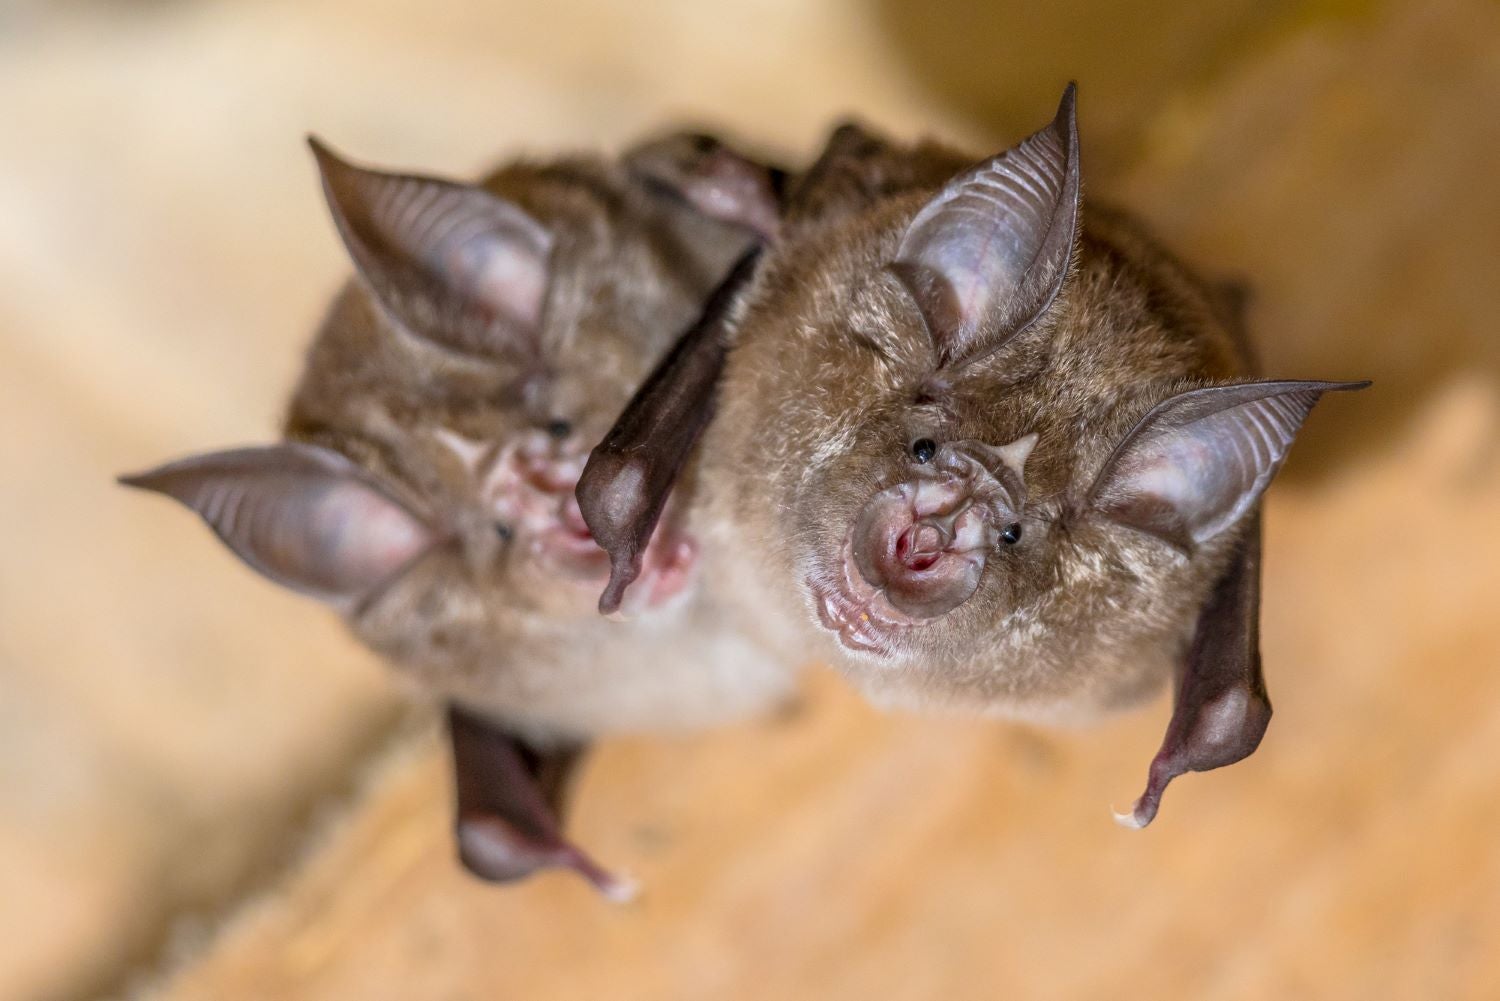 A pair of greater horseshoe bats, whose distinctive noses aid them in echolocation.